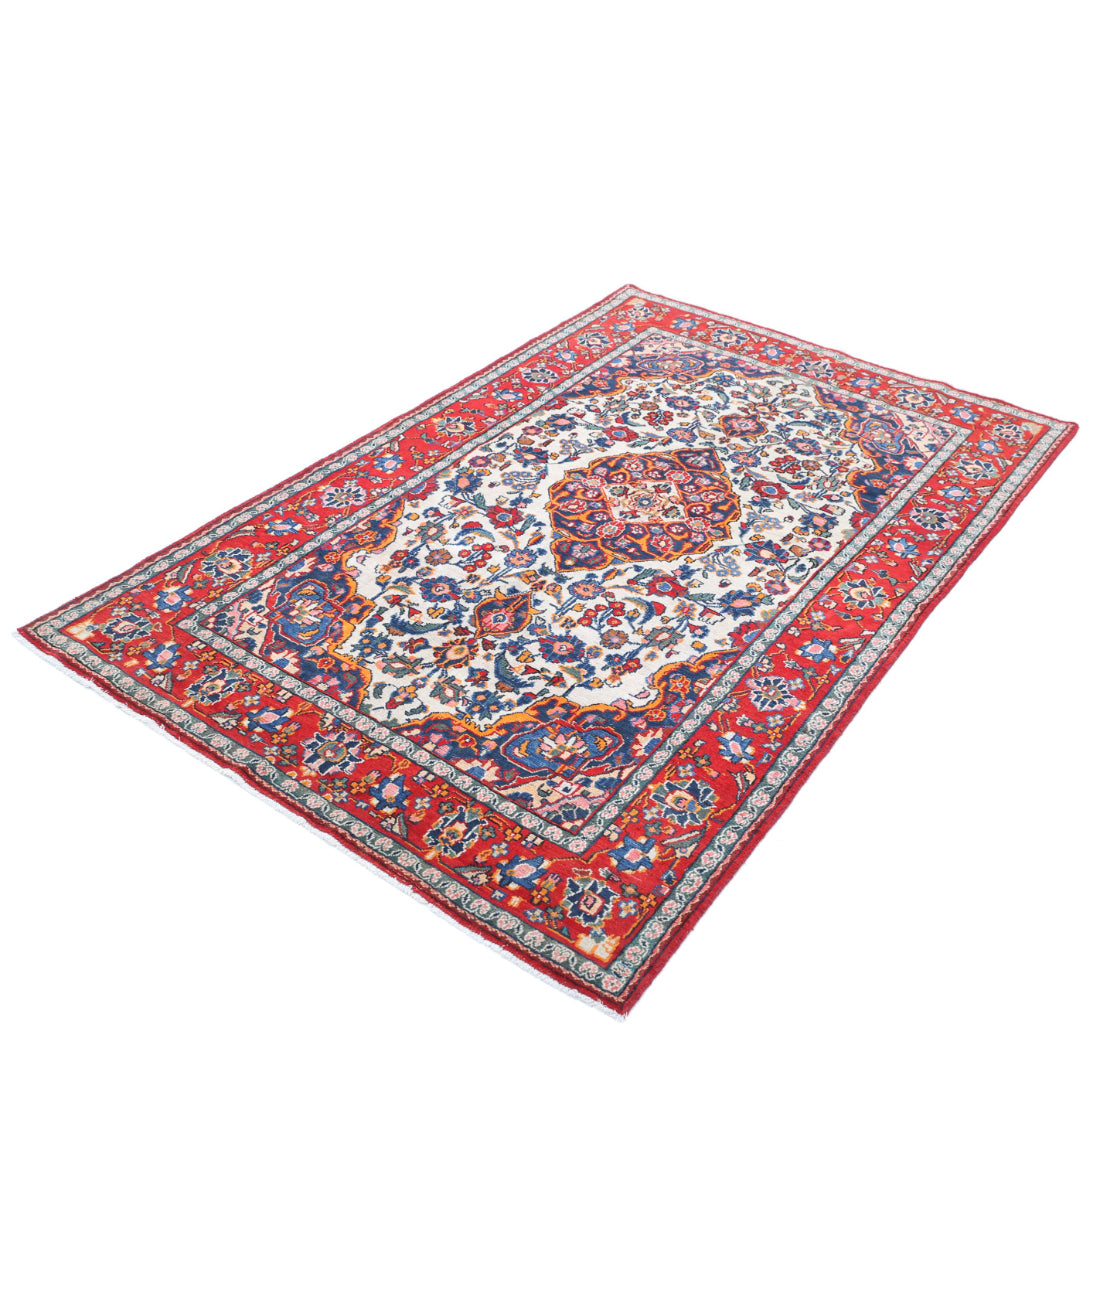 Hand Knotted Persian Navahand Wool Rug - 4'2'' x 6'8'' 4'2'' x 6'8'' (125 X 200) / Ivory / Red